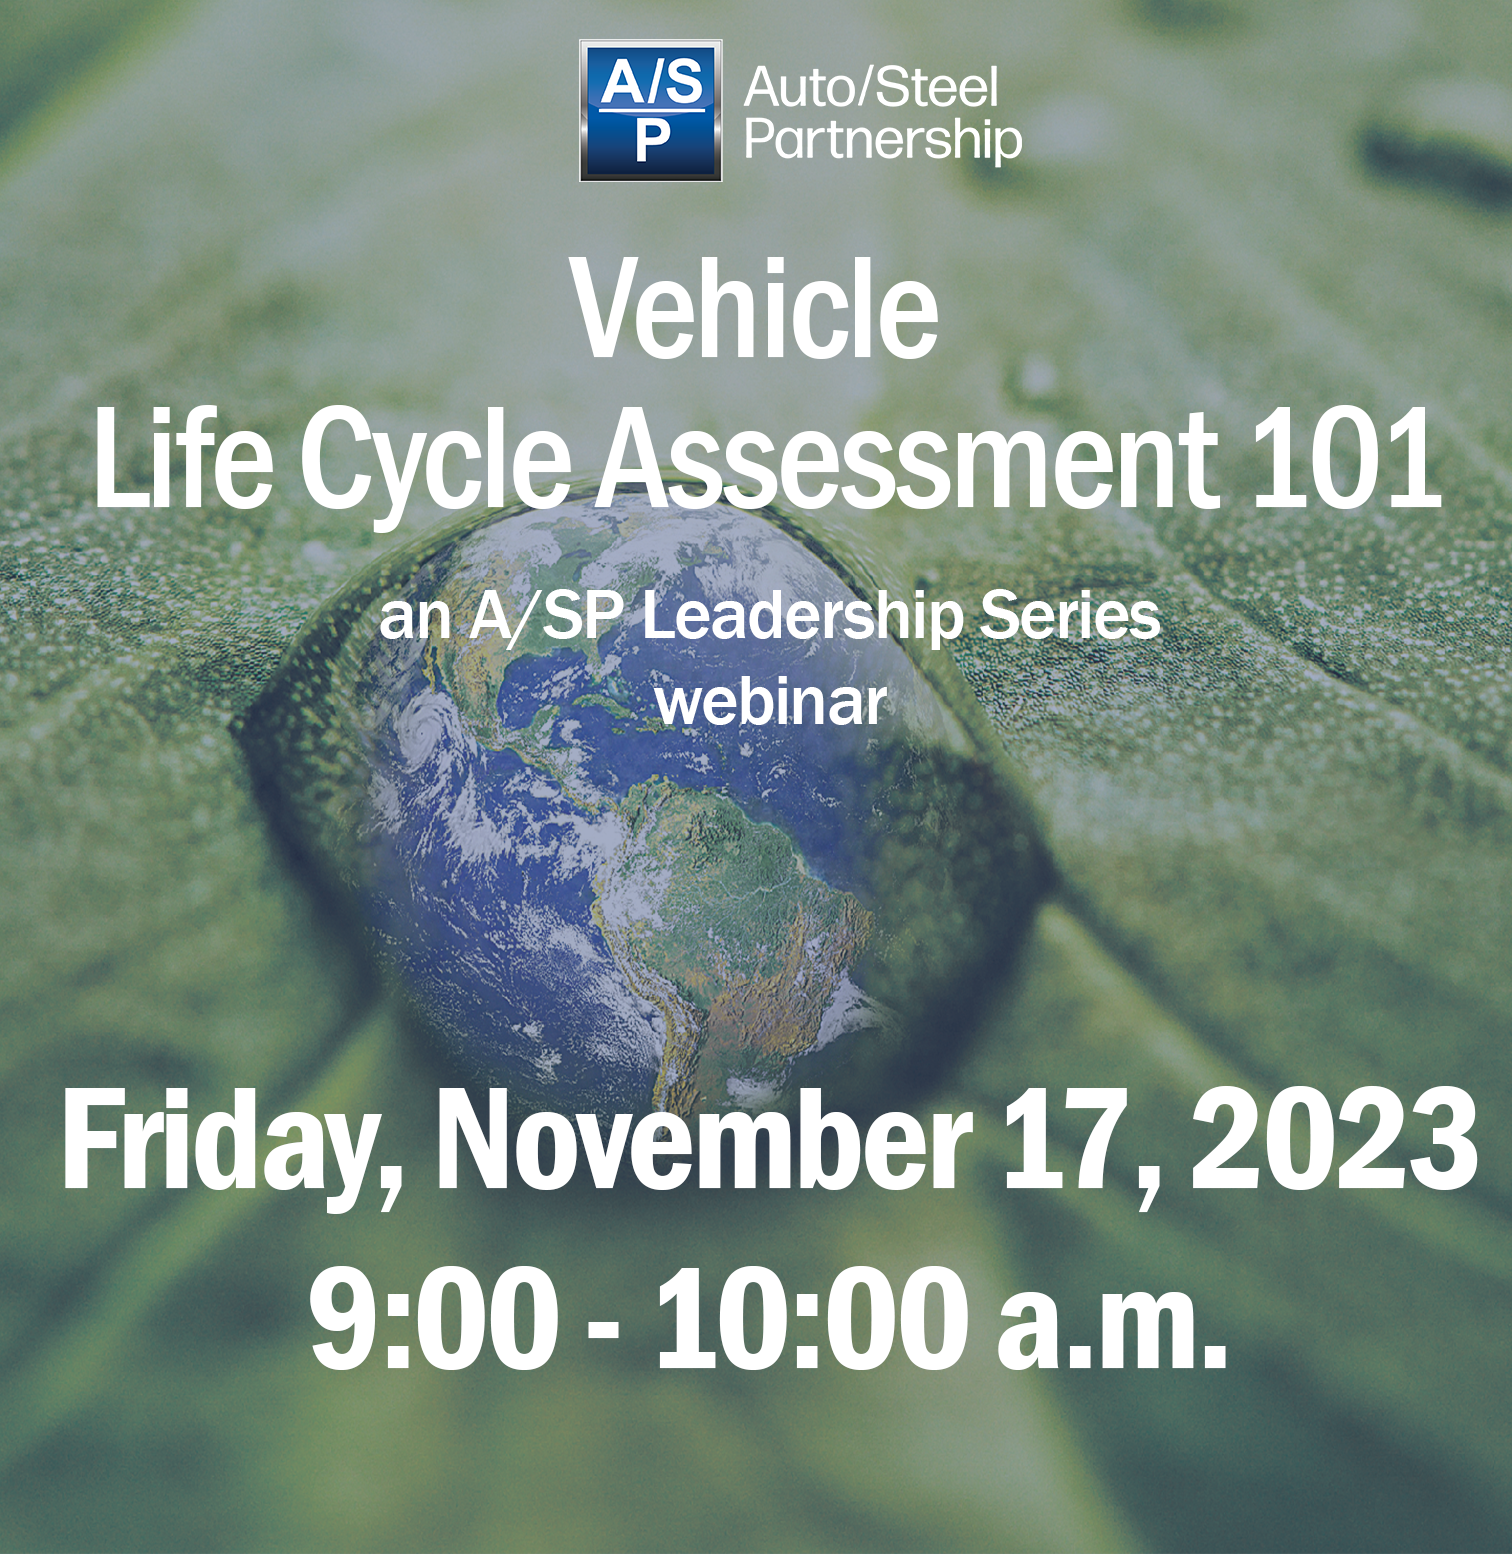 Vehicle life cycle assessment 101